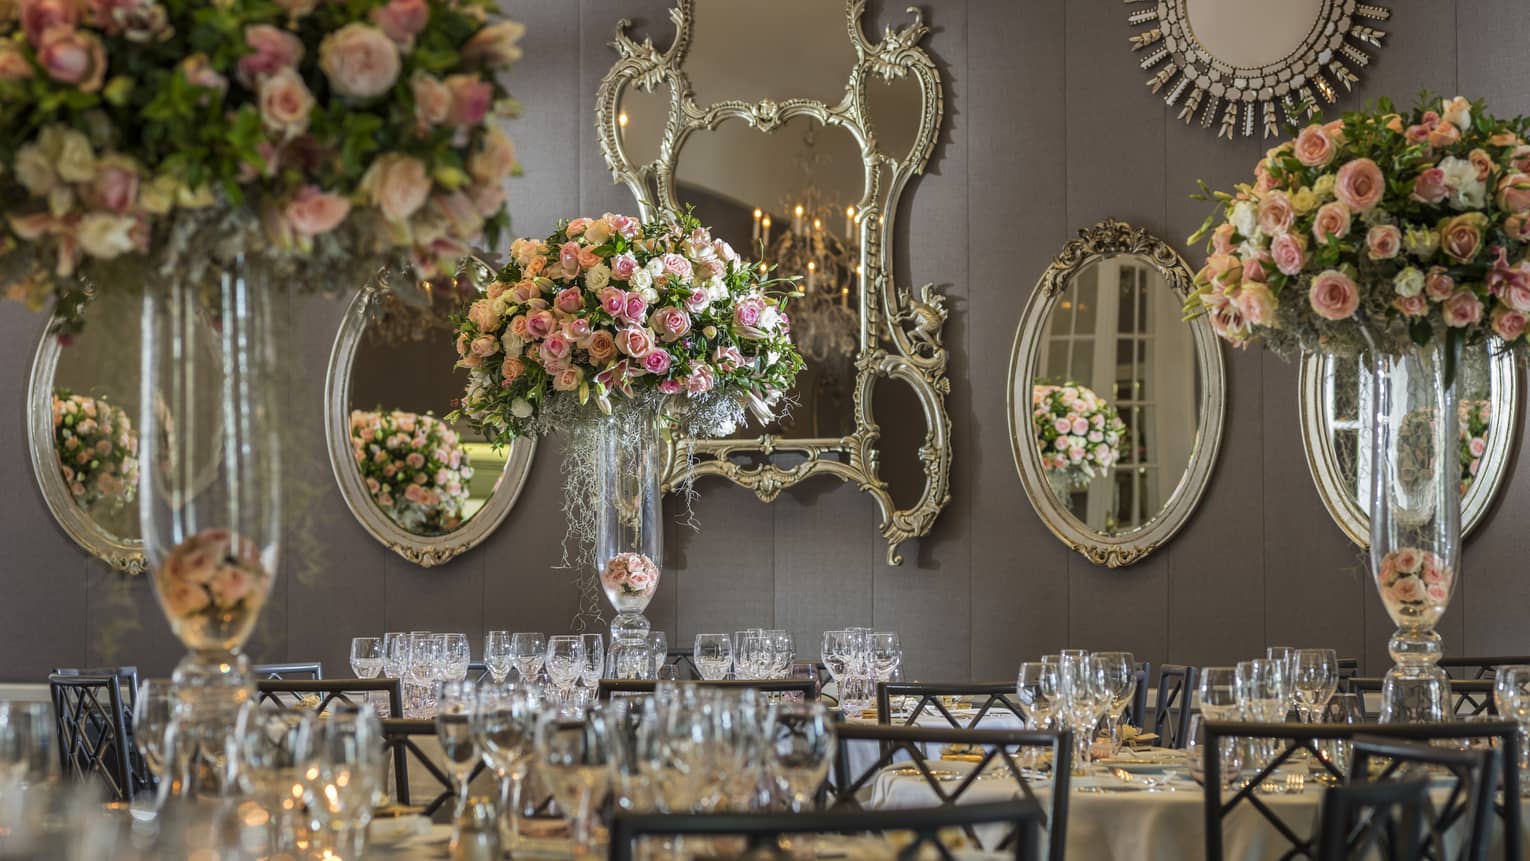 Arcadia Ballroom with wall of antique style mirrors over banquet dining tables with pink roses